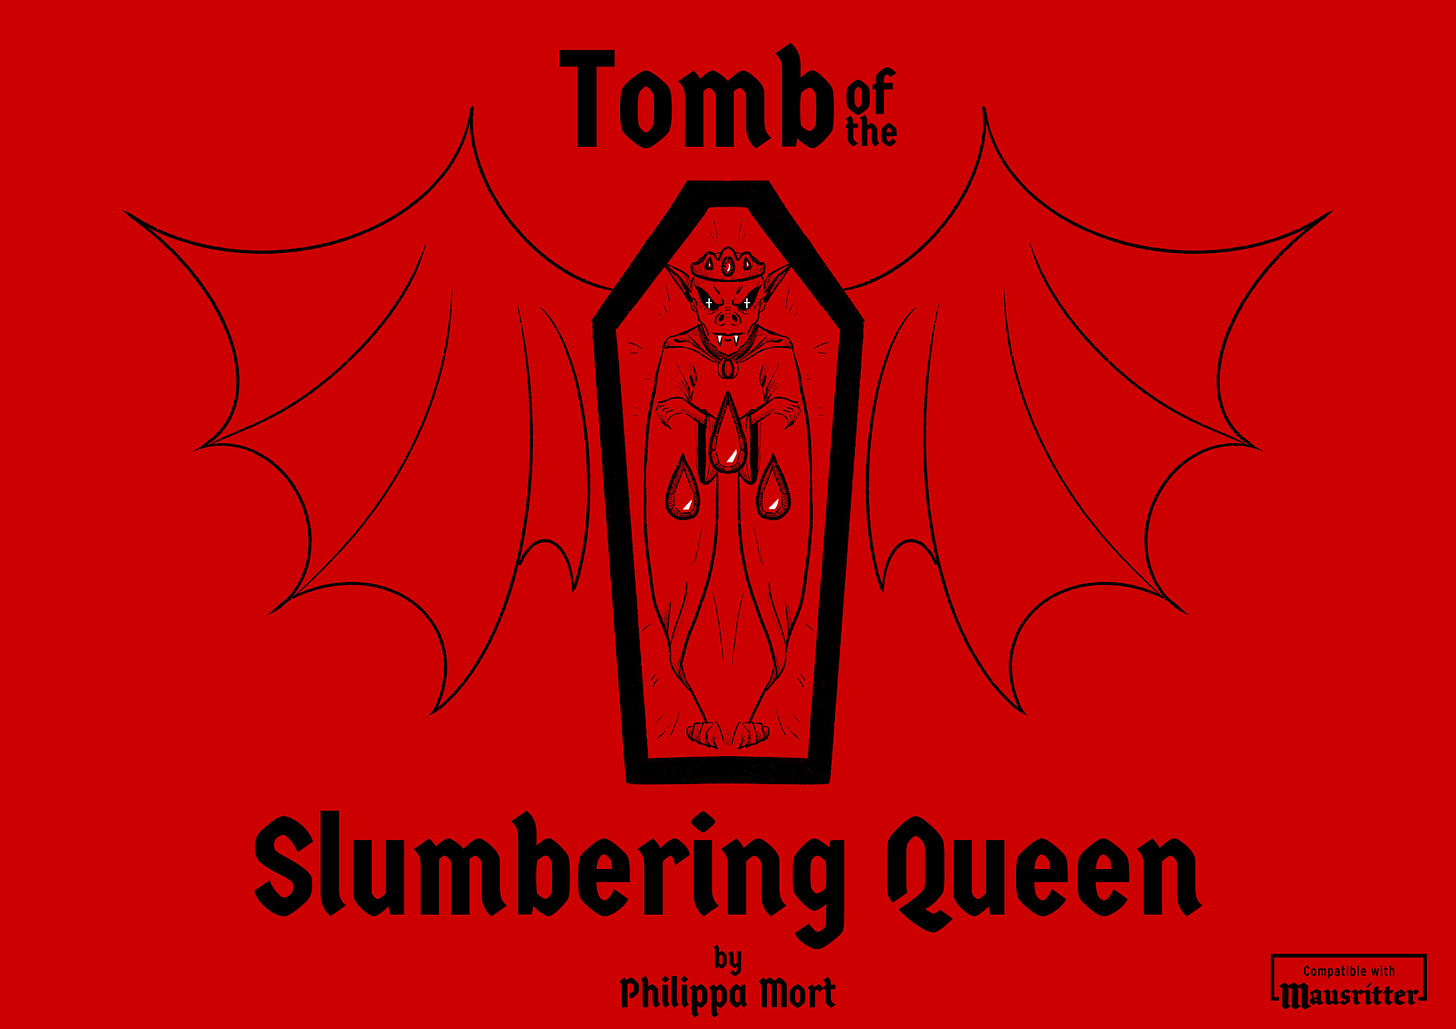 Cover of Tomb of the Slumbering Queen. It shows a linear illustration of a Vampire Bat queen resting in a coffin, with her bat wings splayed out. She wears a diadem, and in front of her are 3 crystalline red blood droplets.